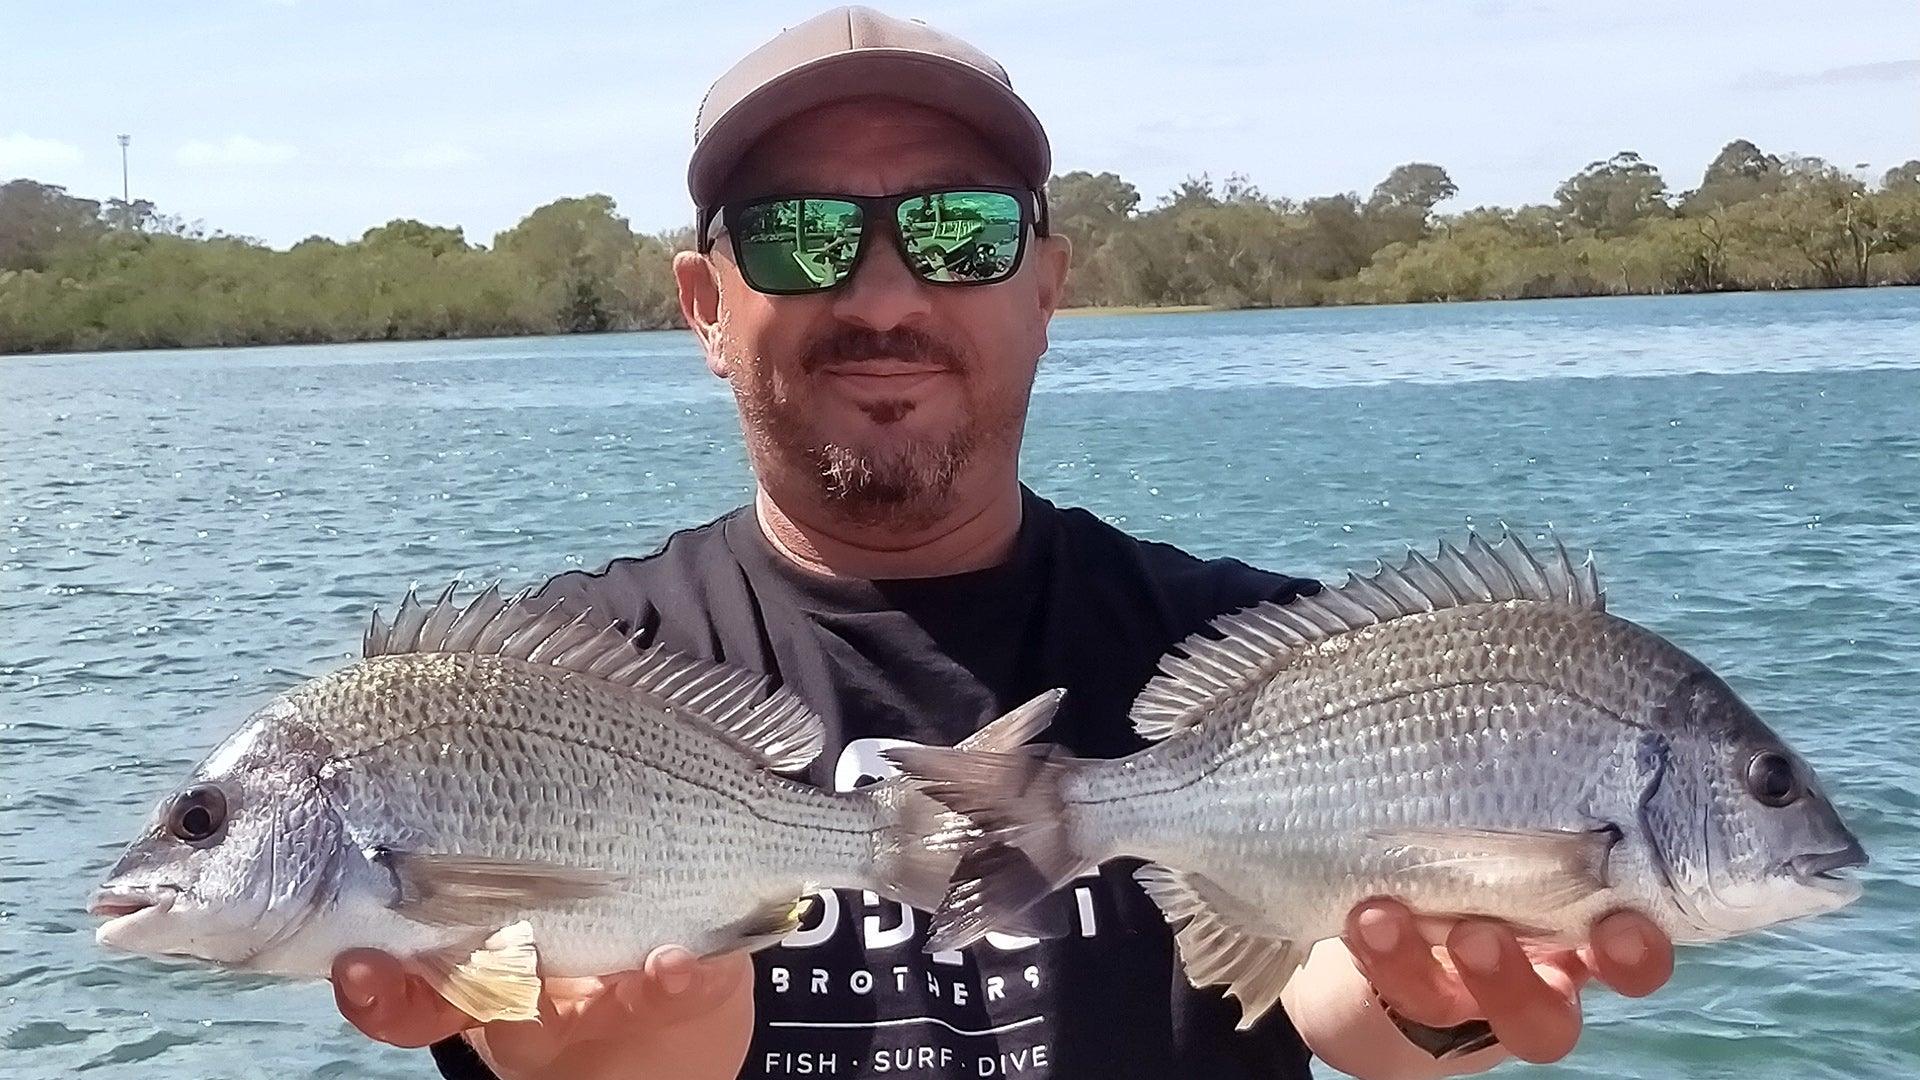 Top 5 Fishing Lures for Bream by Addict Tackle